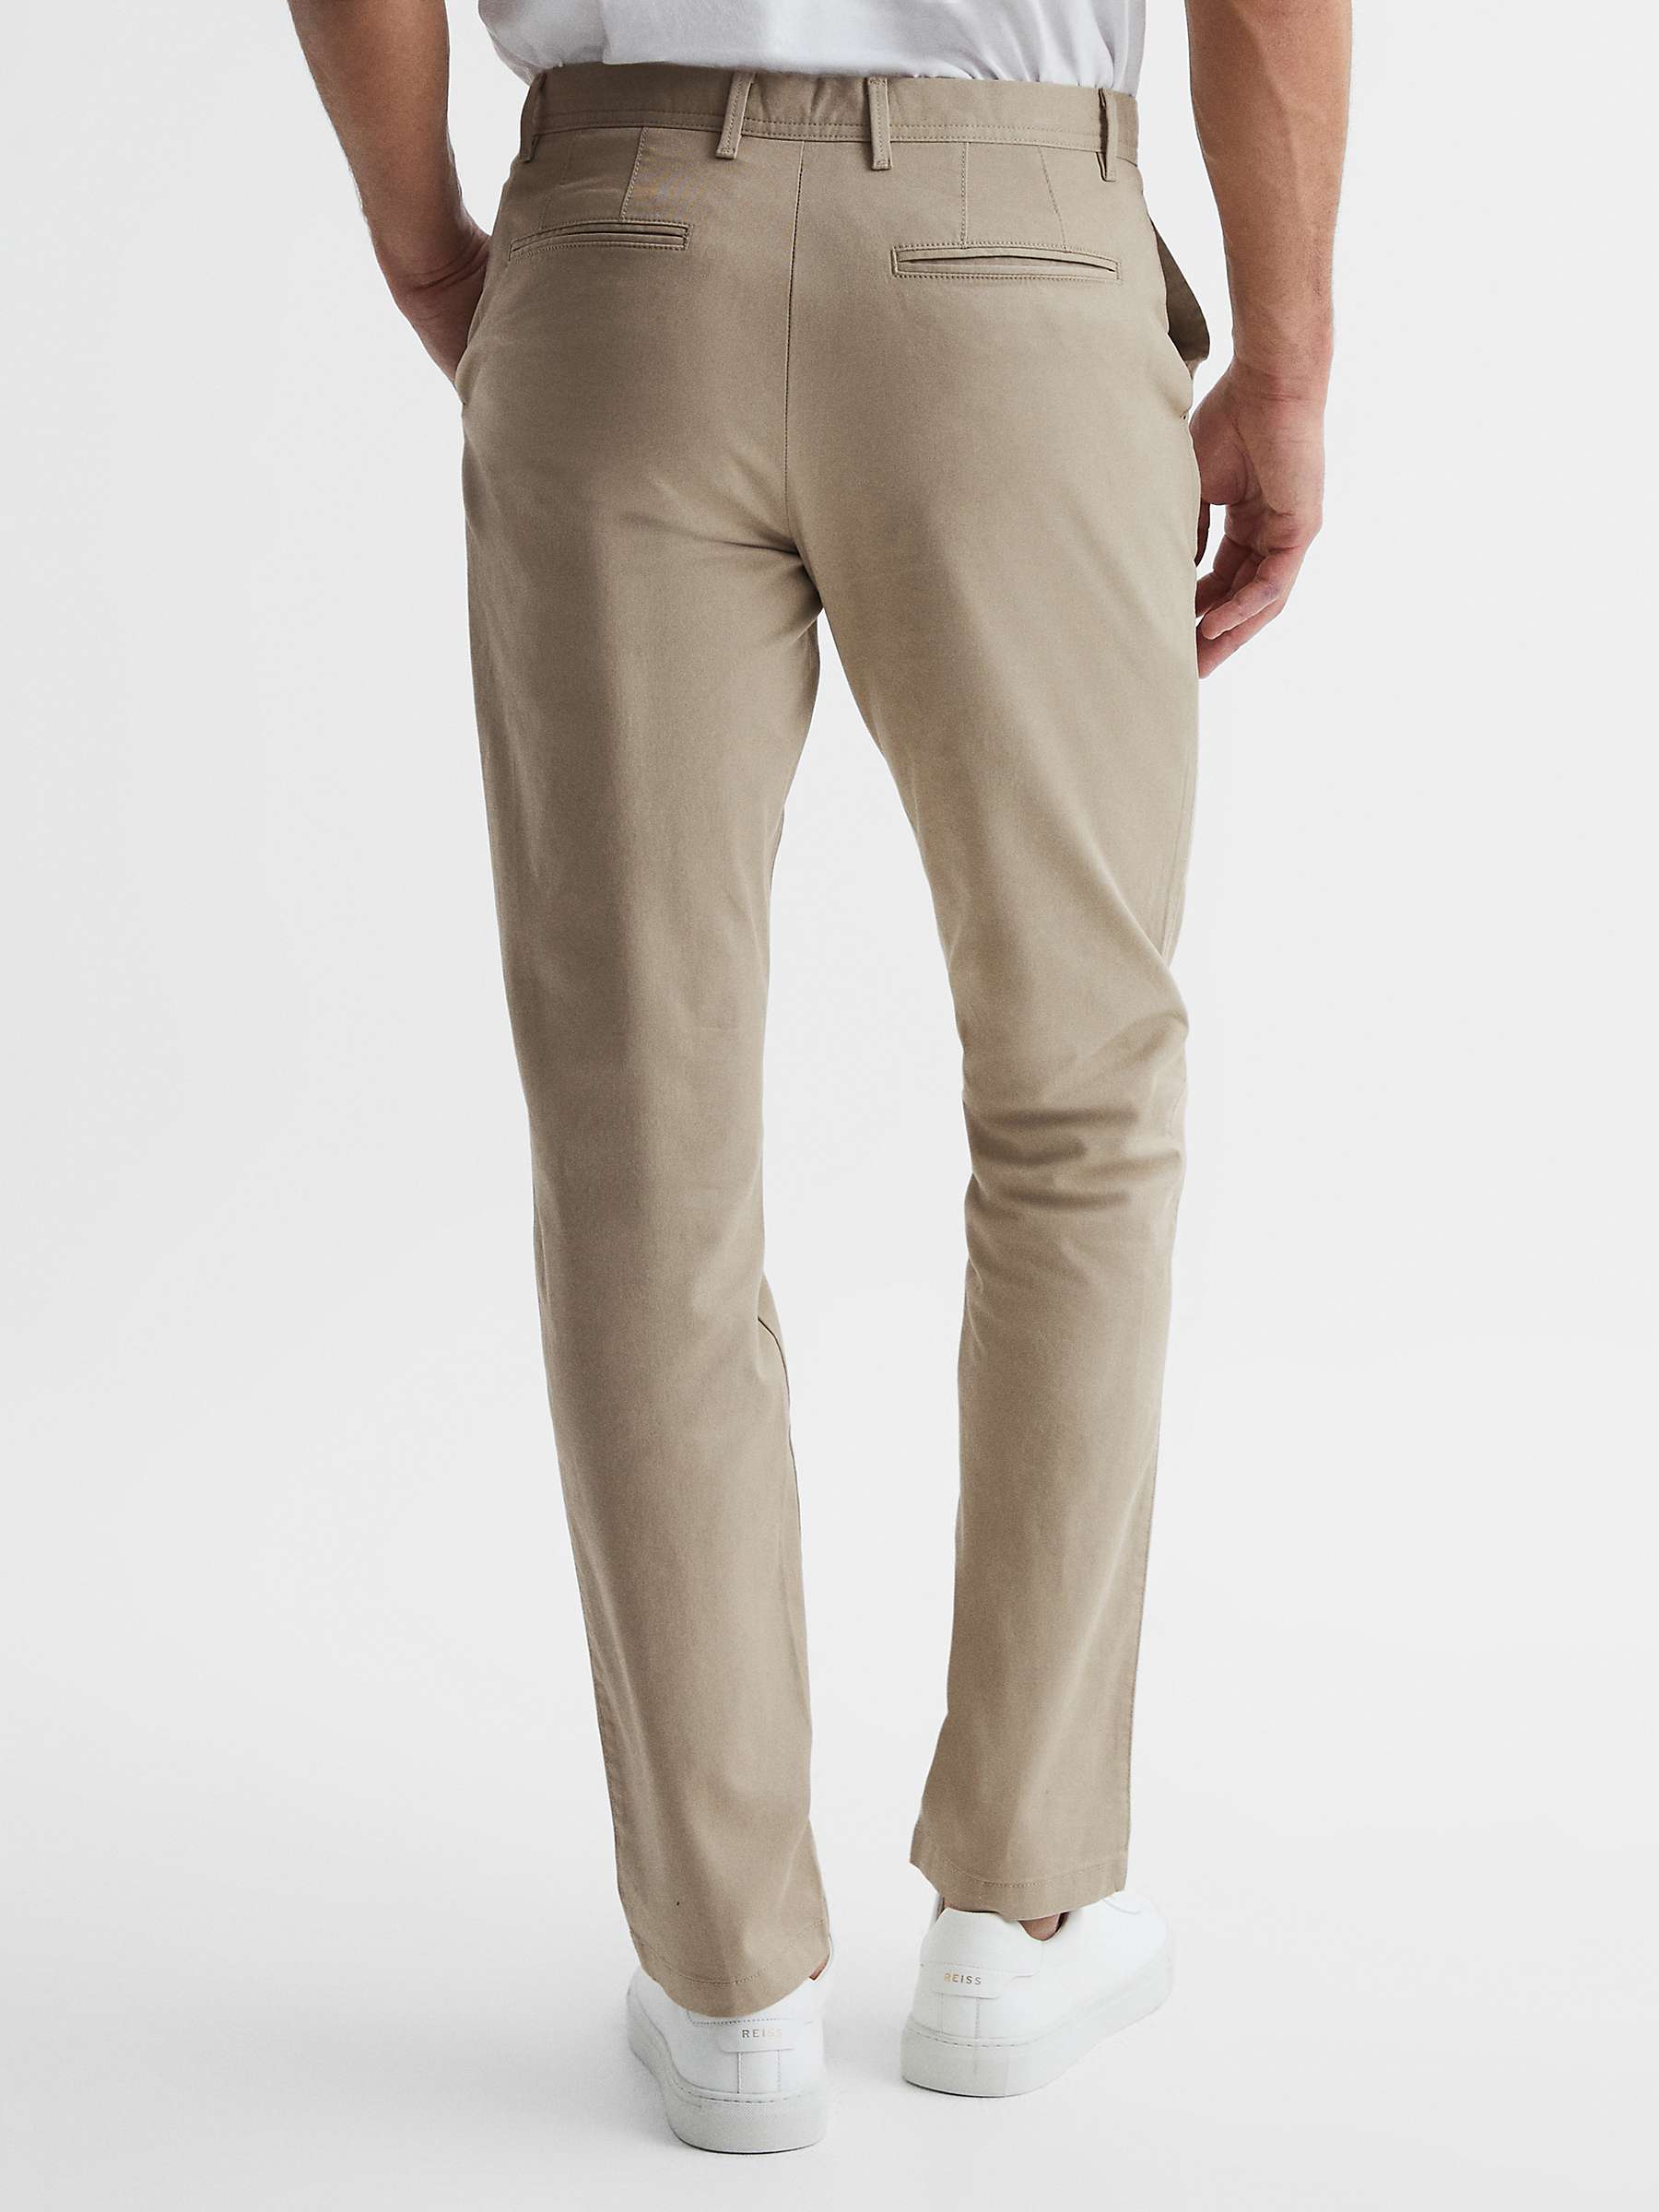 Buy Reiss Pitch Slim Fit Stretch Cotton Chino Trousers Online at johnlewis.com